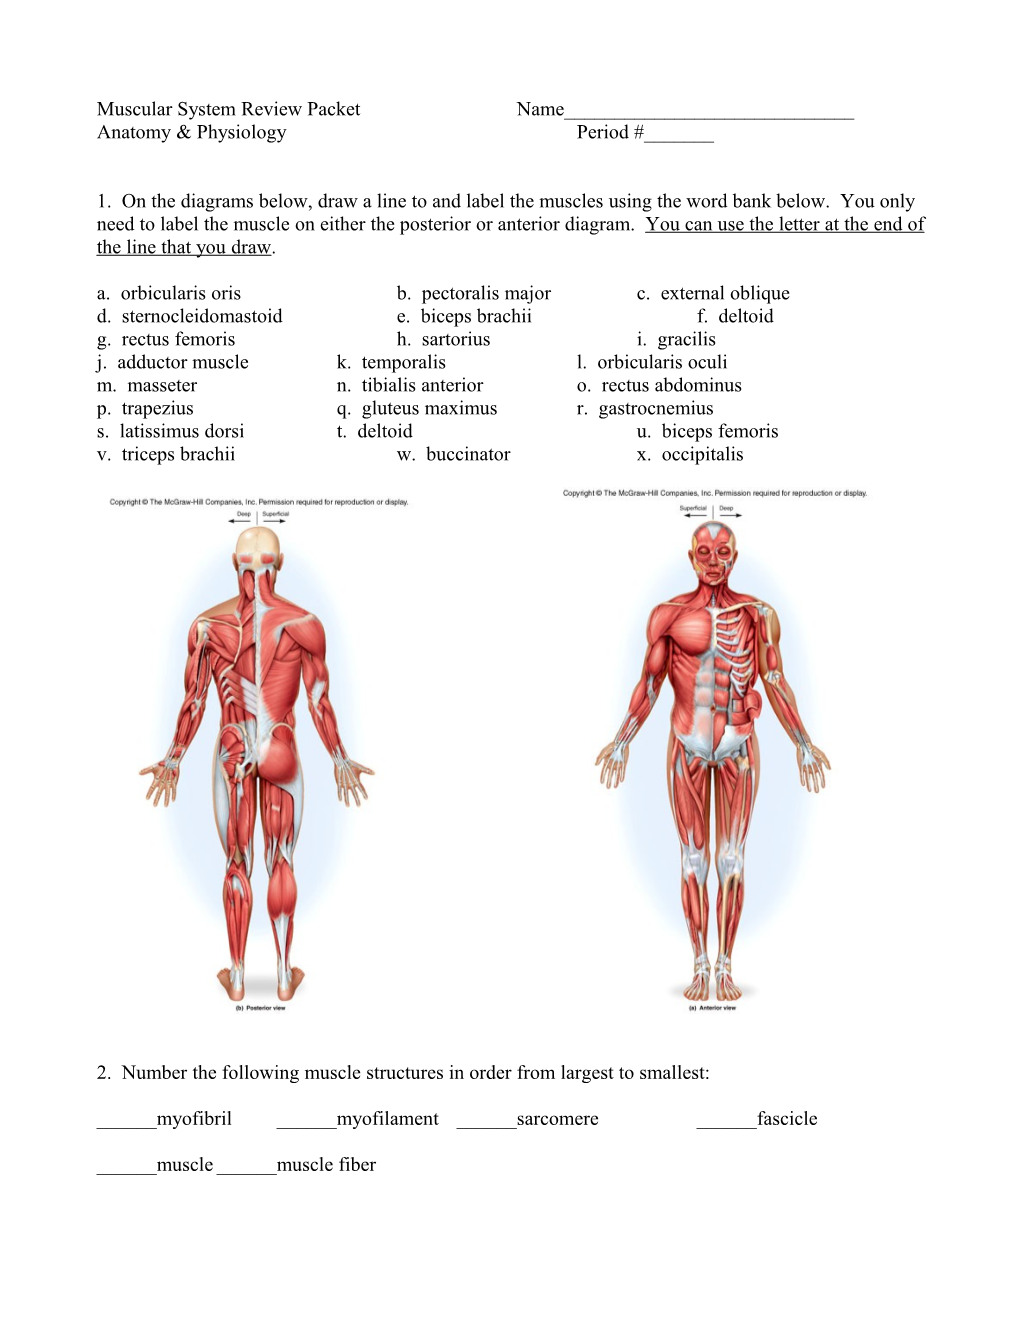 Muscular System Review Packet